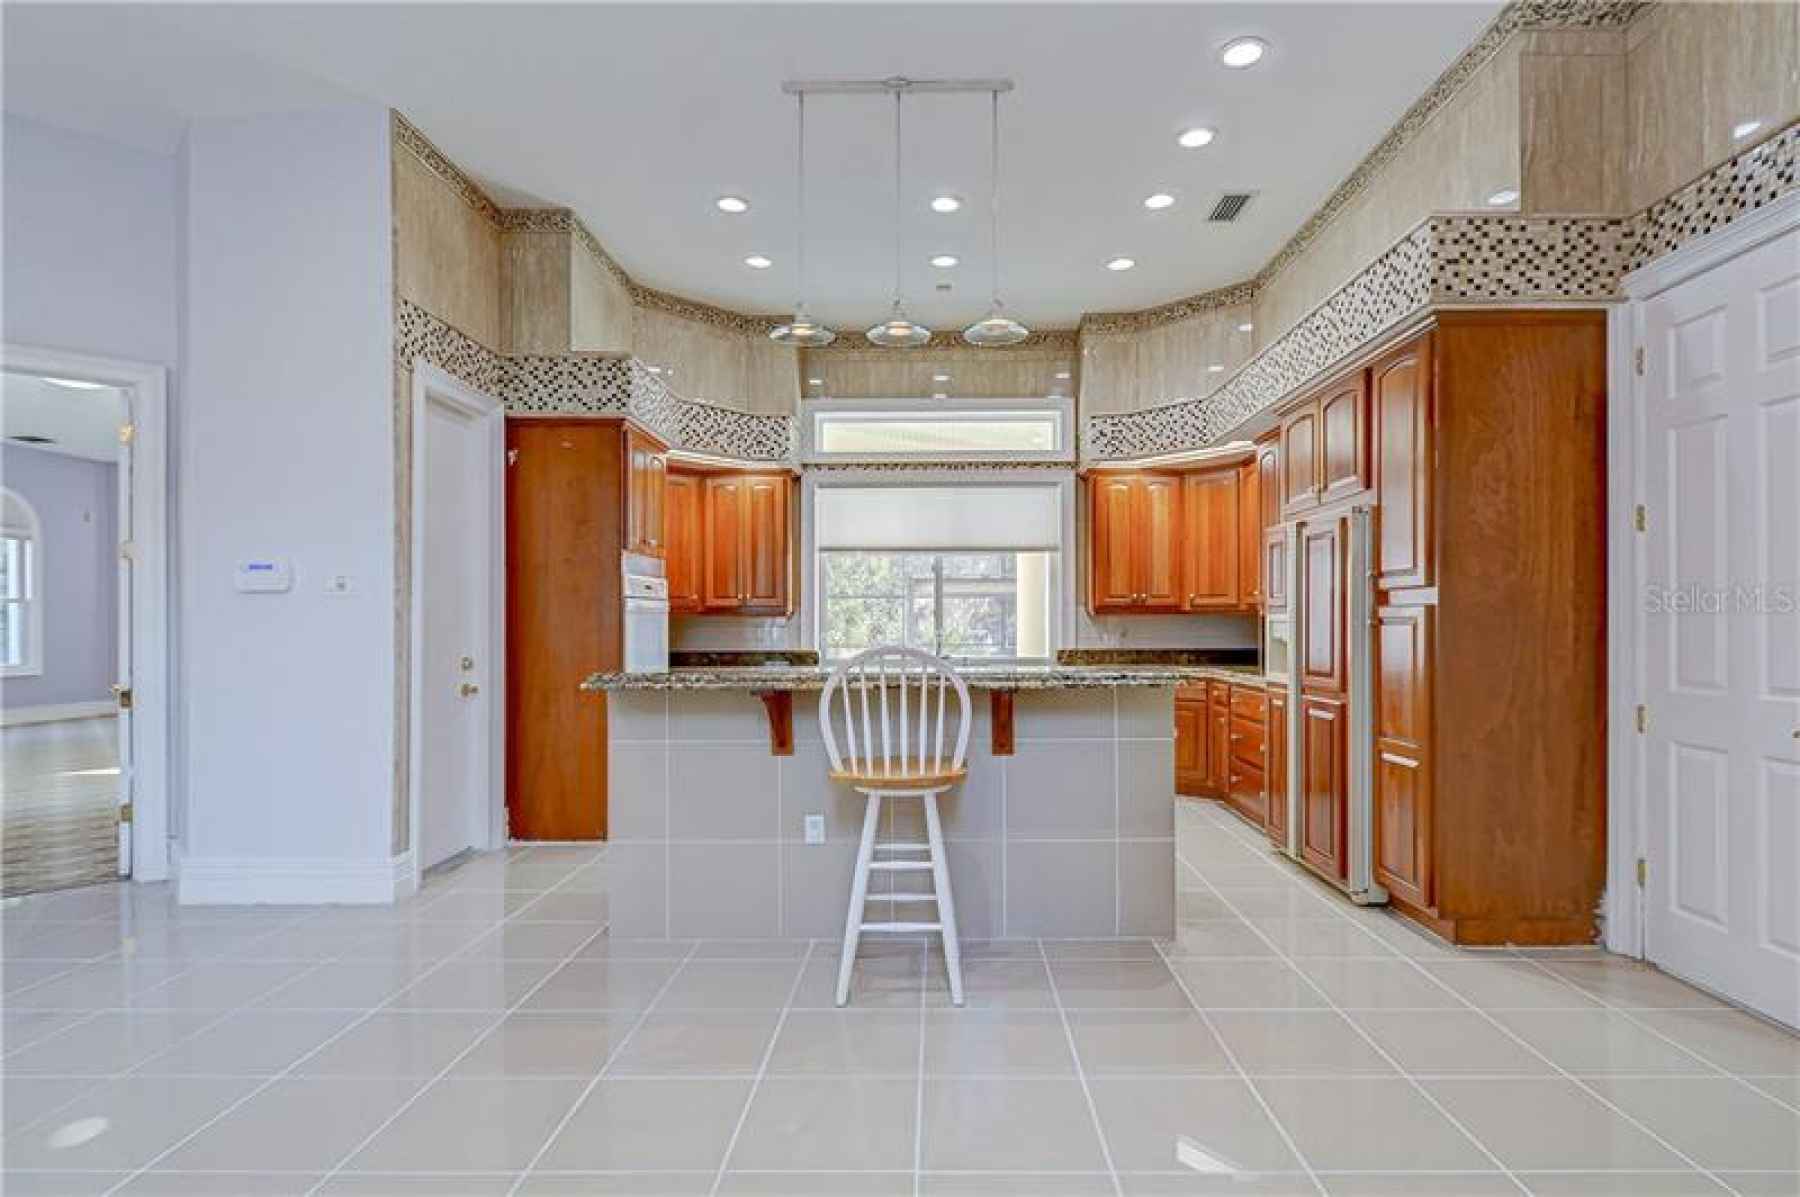 This kitchen is IMMACULATE!!